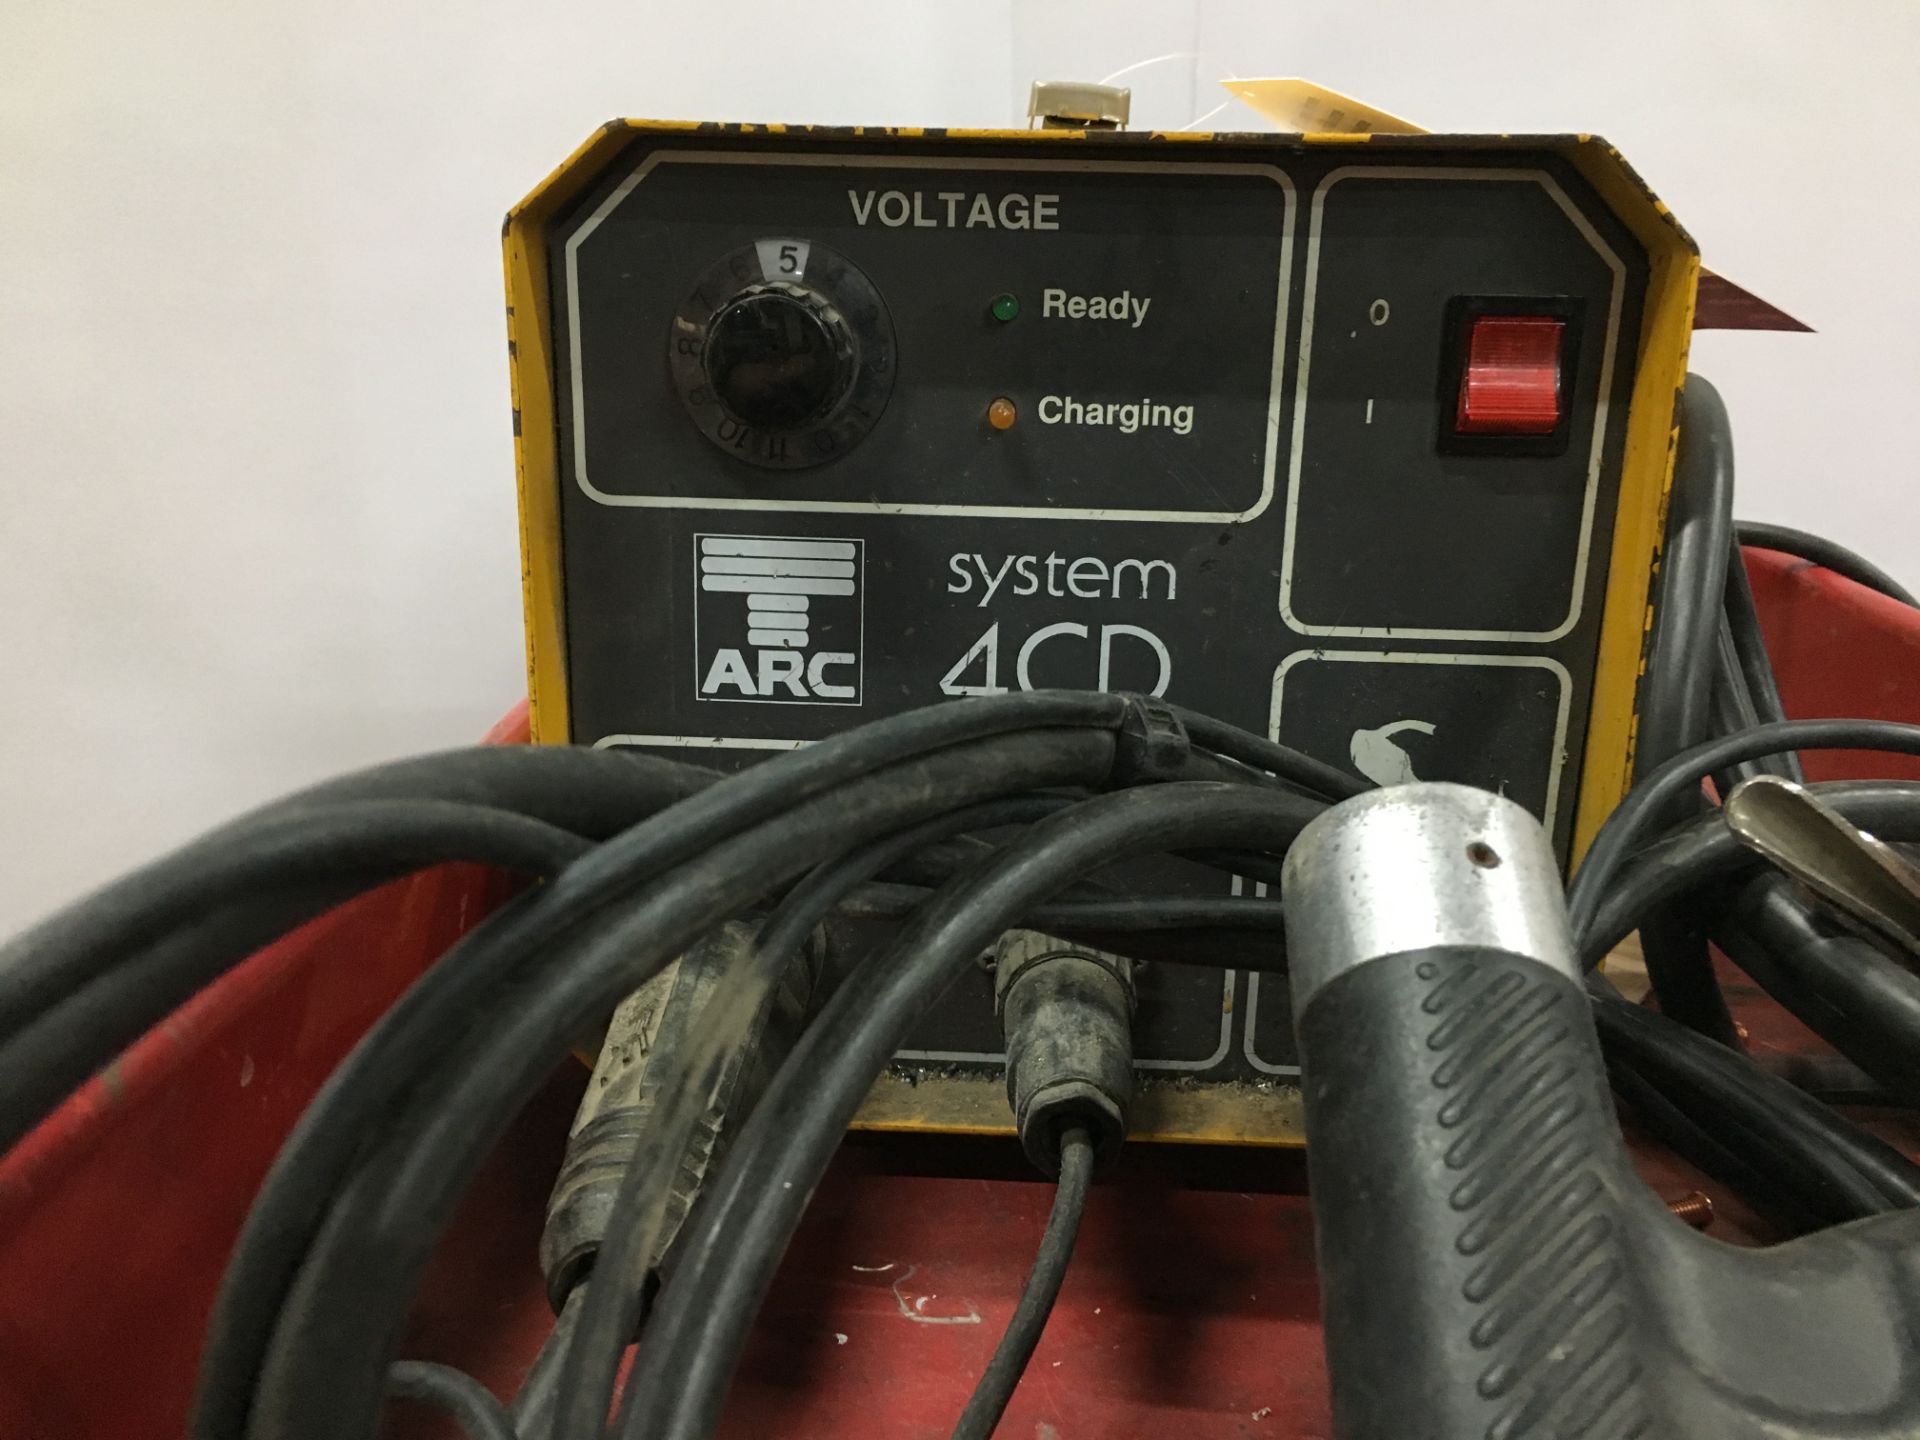 Taylor Studwelding T-ARC System 4 CD Stud Welder with Trolley - Image 5 of 7